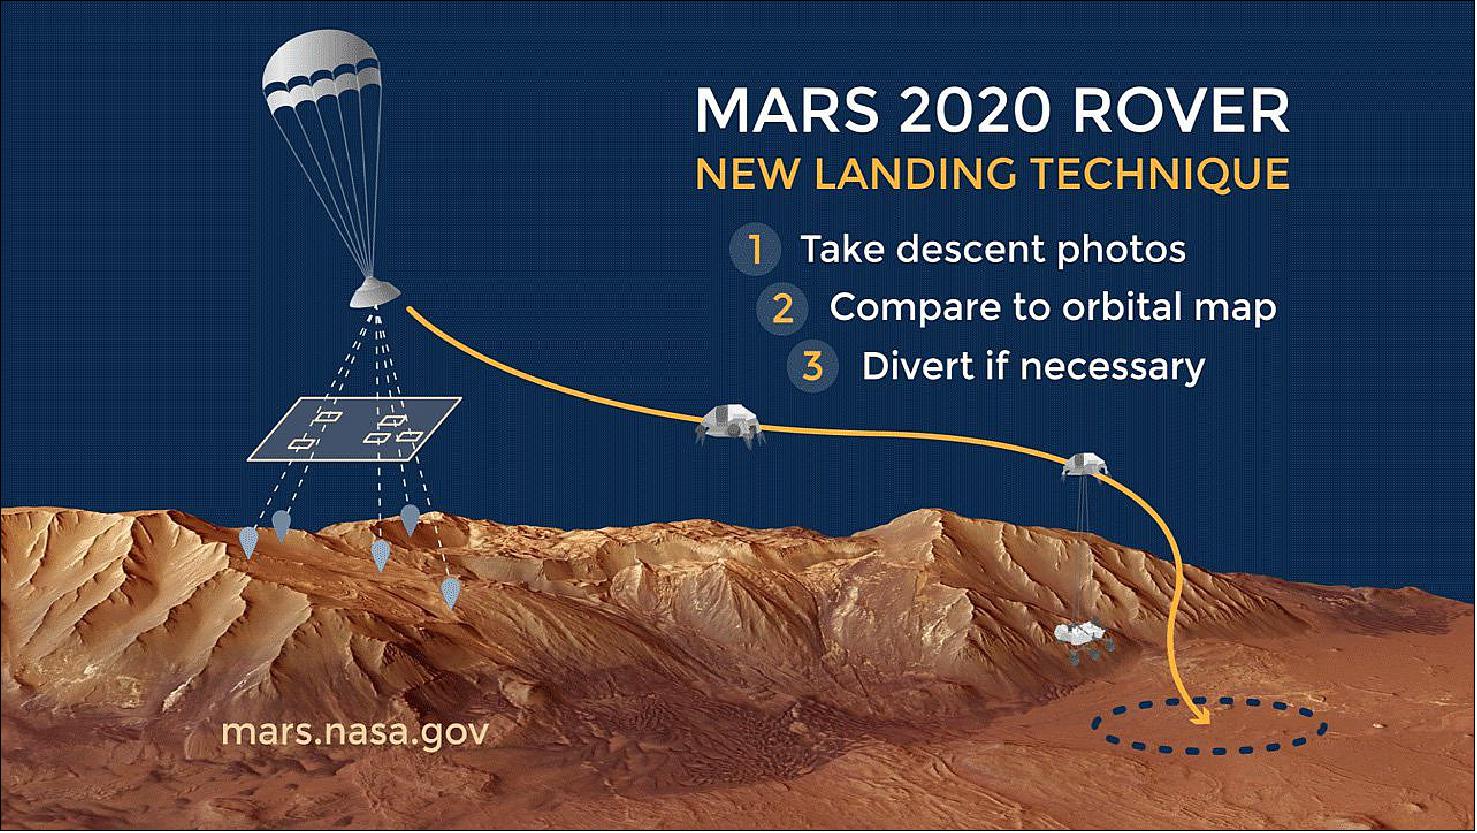 Figure 50: Mars 2020's Perseverance rover is equipped with a lander vision system based on terrain-relative navigation, an advanced method of autonomously comparing real-time images to preloaded maps that determine the rover's position relative to hazards in the landing area. Divert guidance algorithms and software can then direct the rover around those obstacles if needed (image credit: NASA/JPL-Caltech)